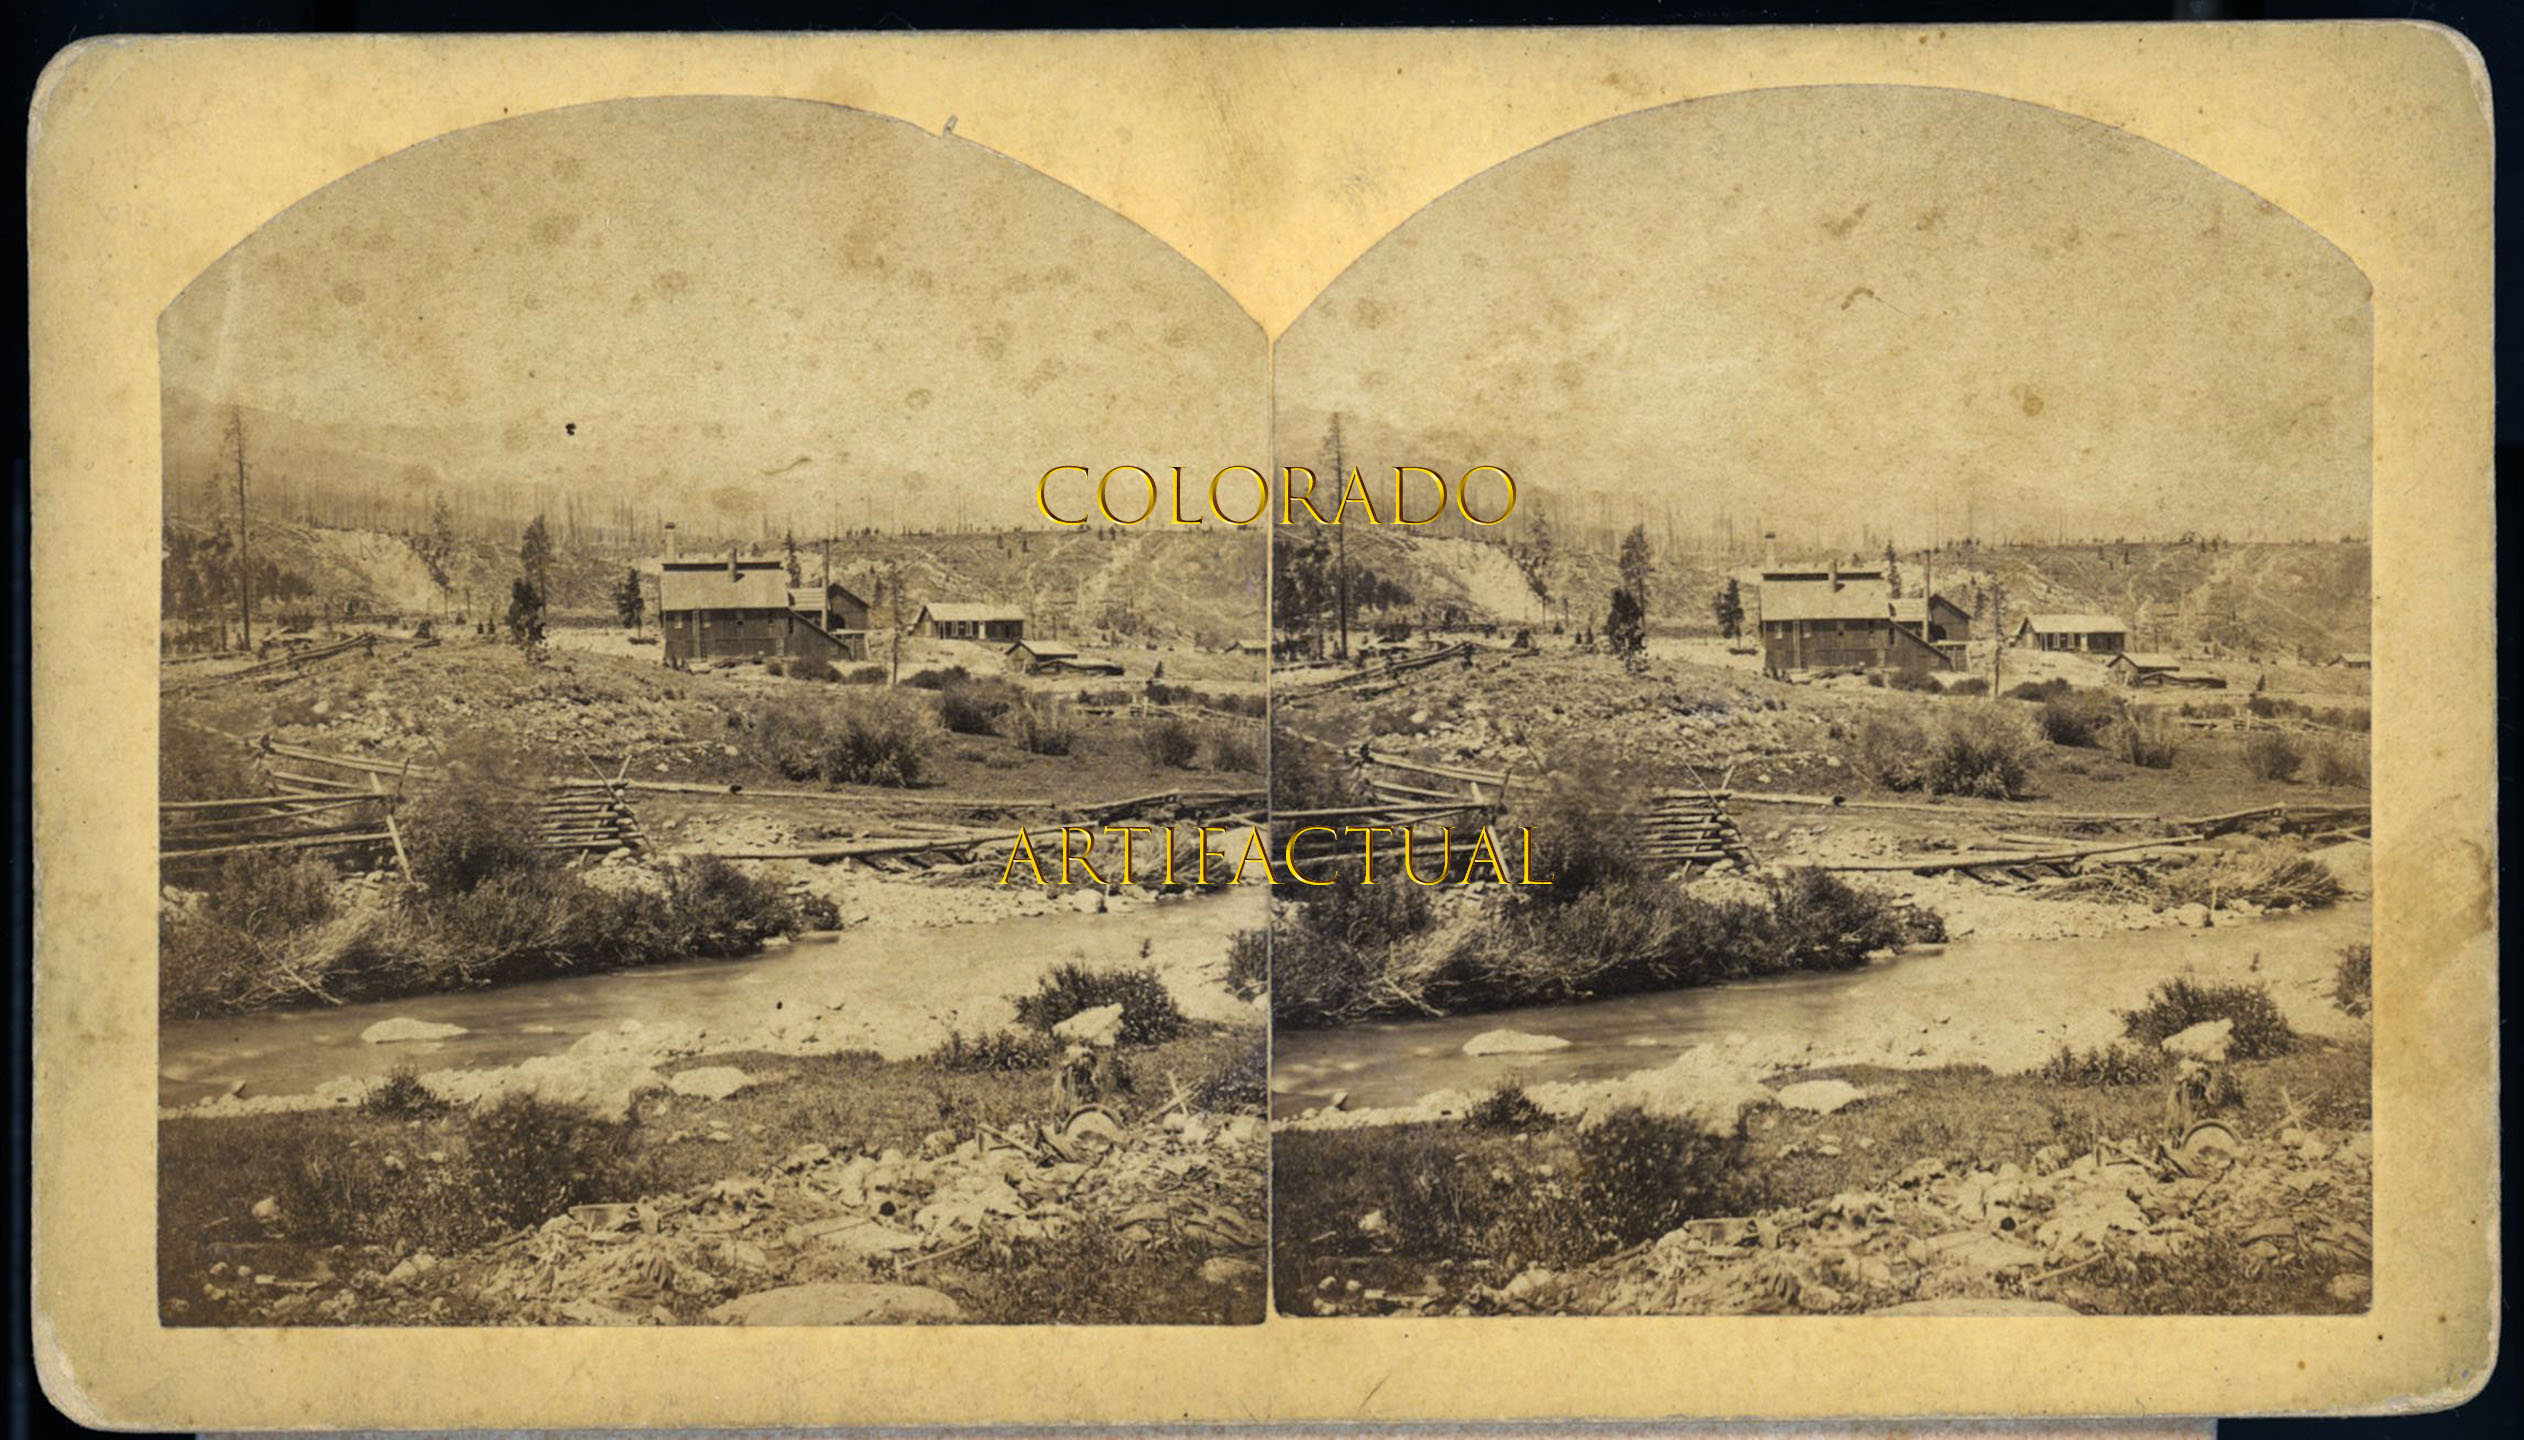 BRECKENRIDGE, SUMMIT COUNTY, COLORADO, SUMMIT COUNTY SMELTER, stereoview photograph 1880